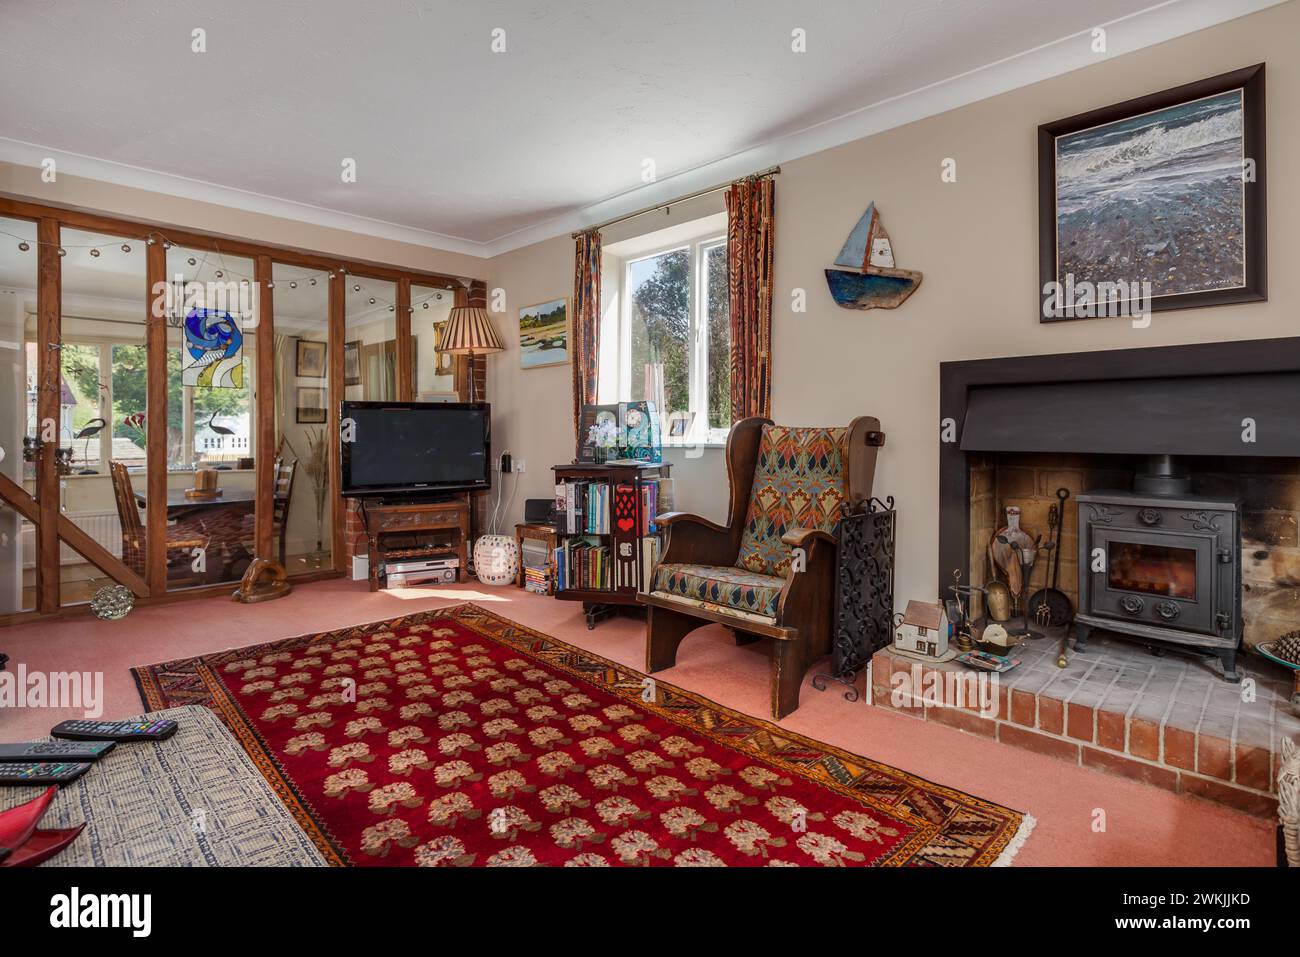 Ashley, Newmarket, Suffolk - 20 April 2015: Traditional furnished living room with fireplace and log burner Stock Photo